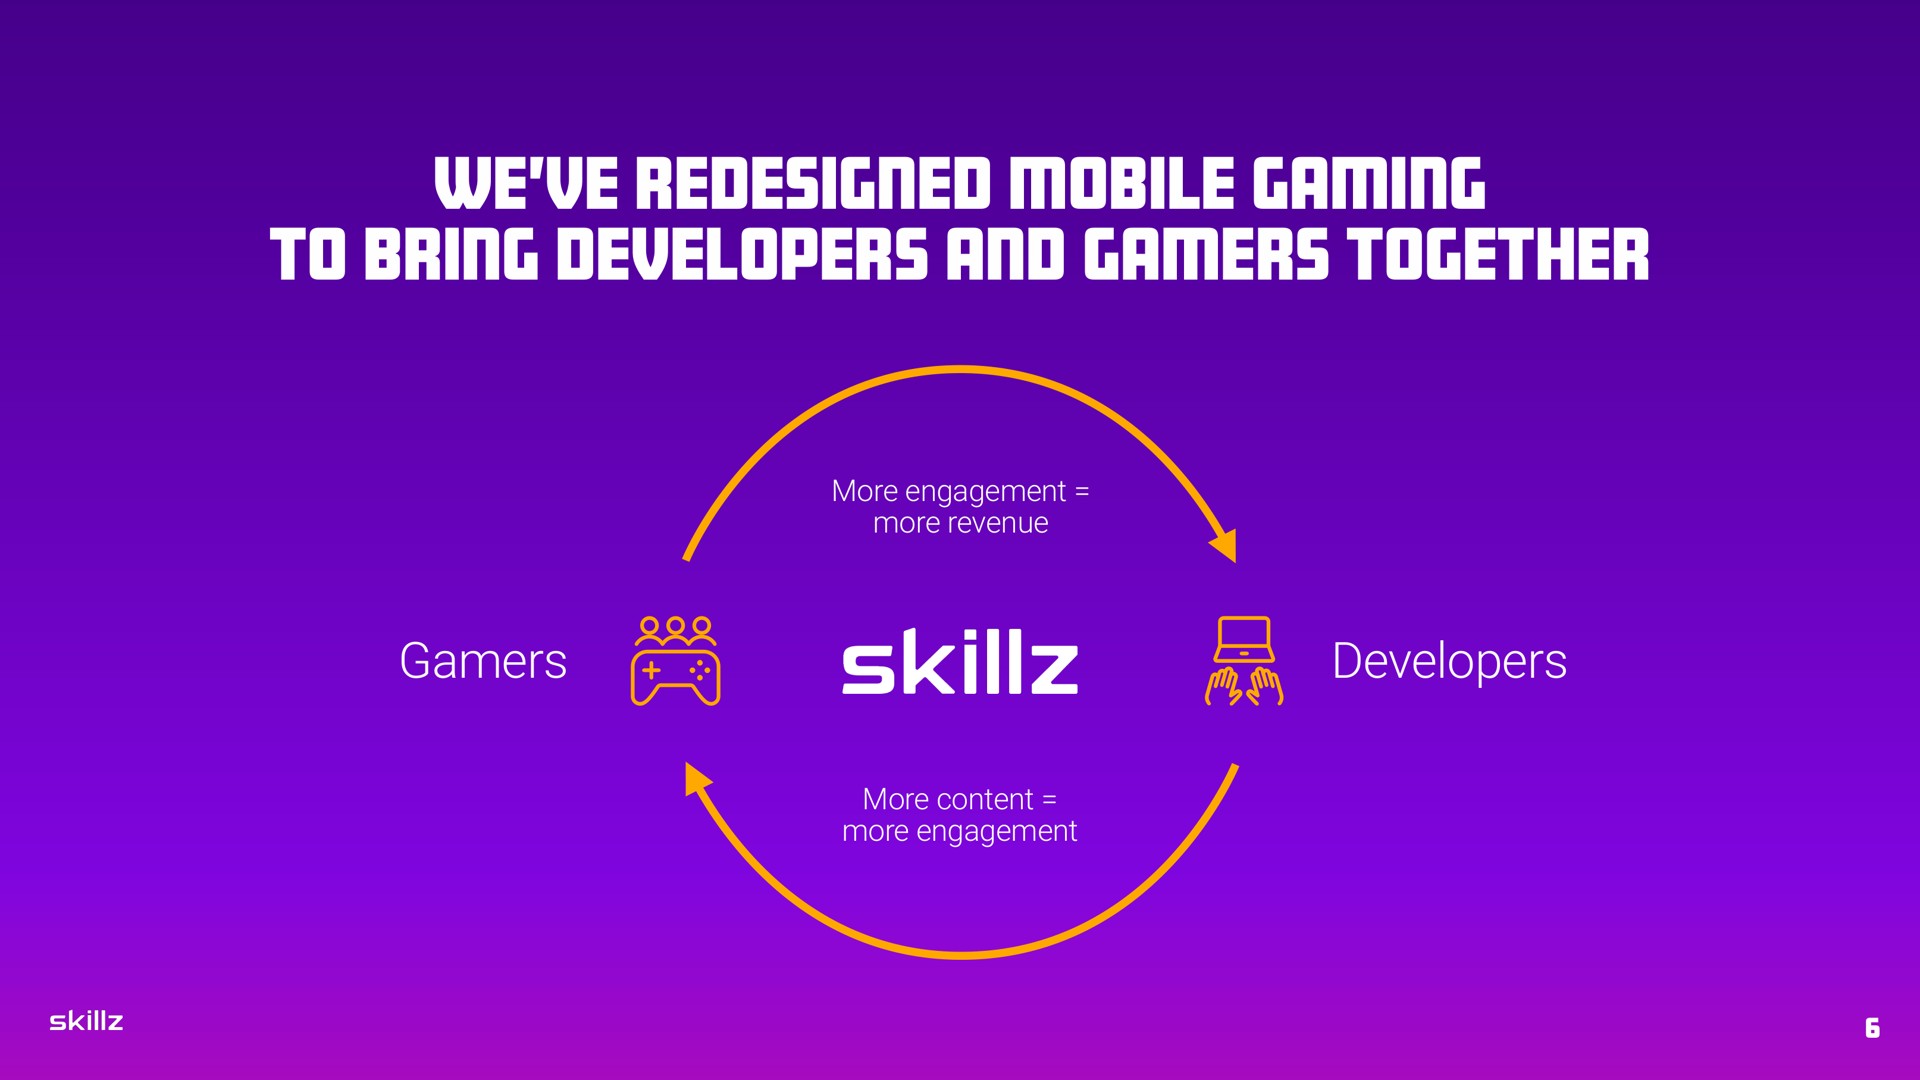 we redesigned mobile gaming to bring developers and together developers | Skillz